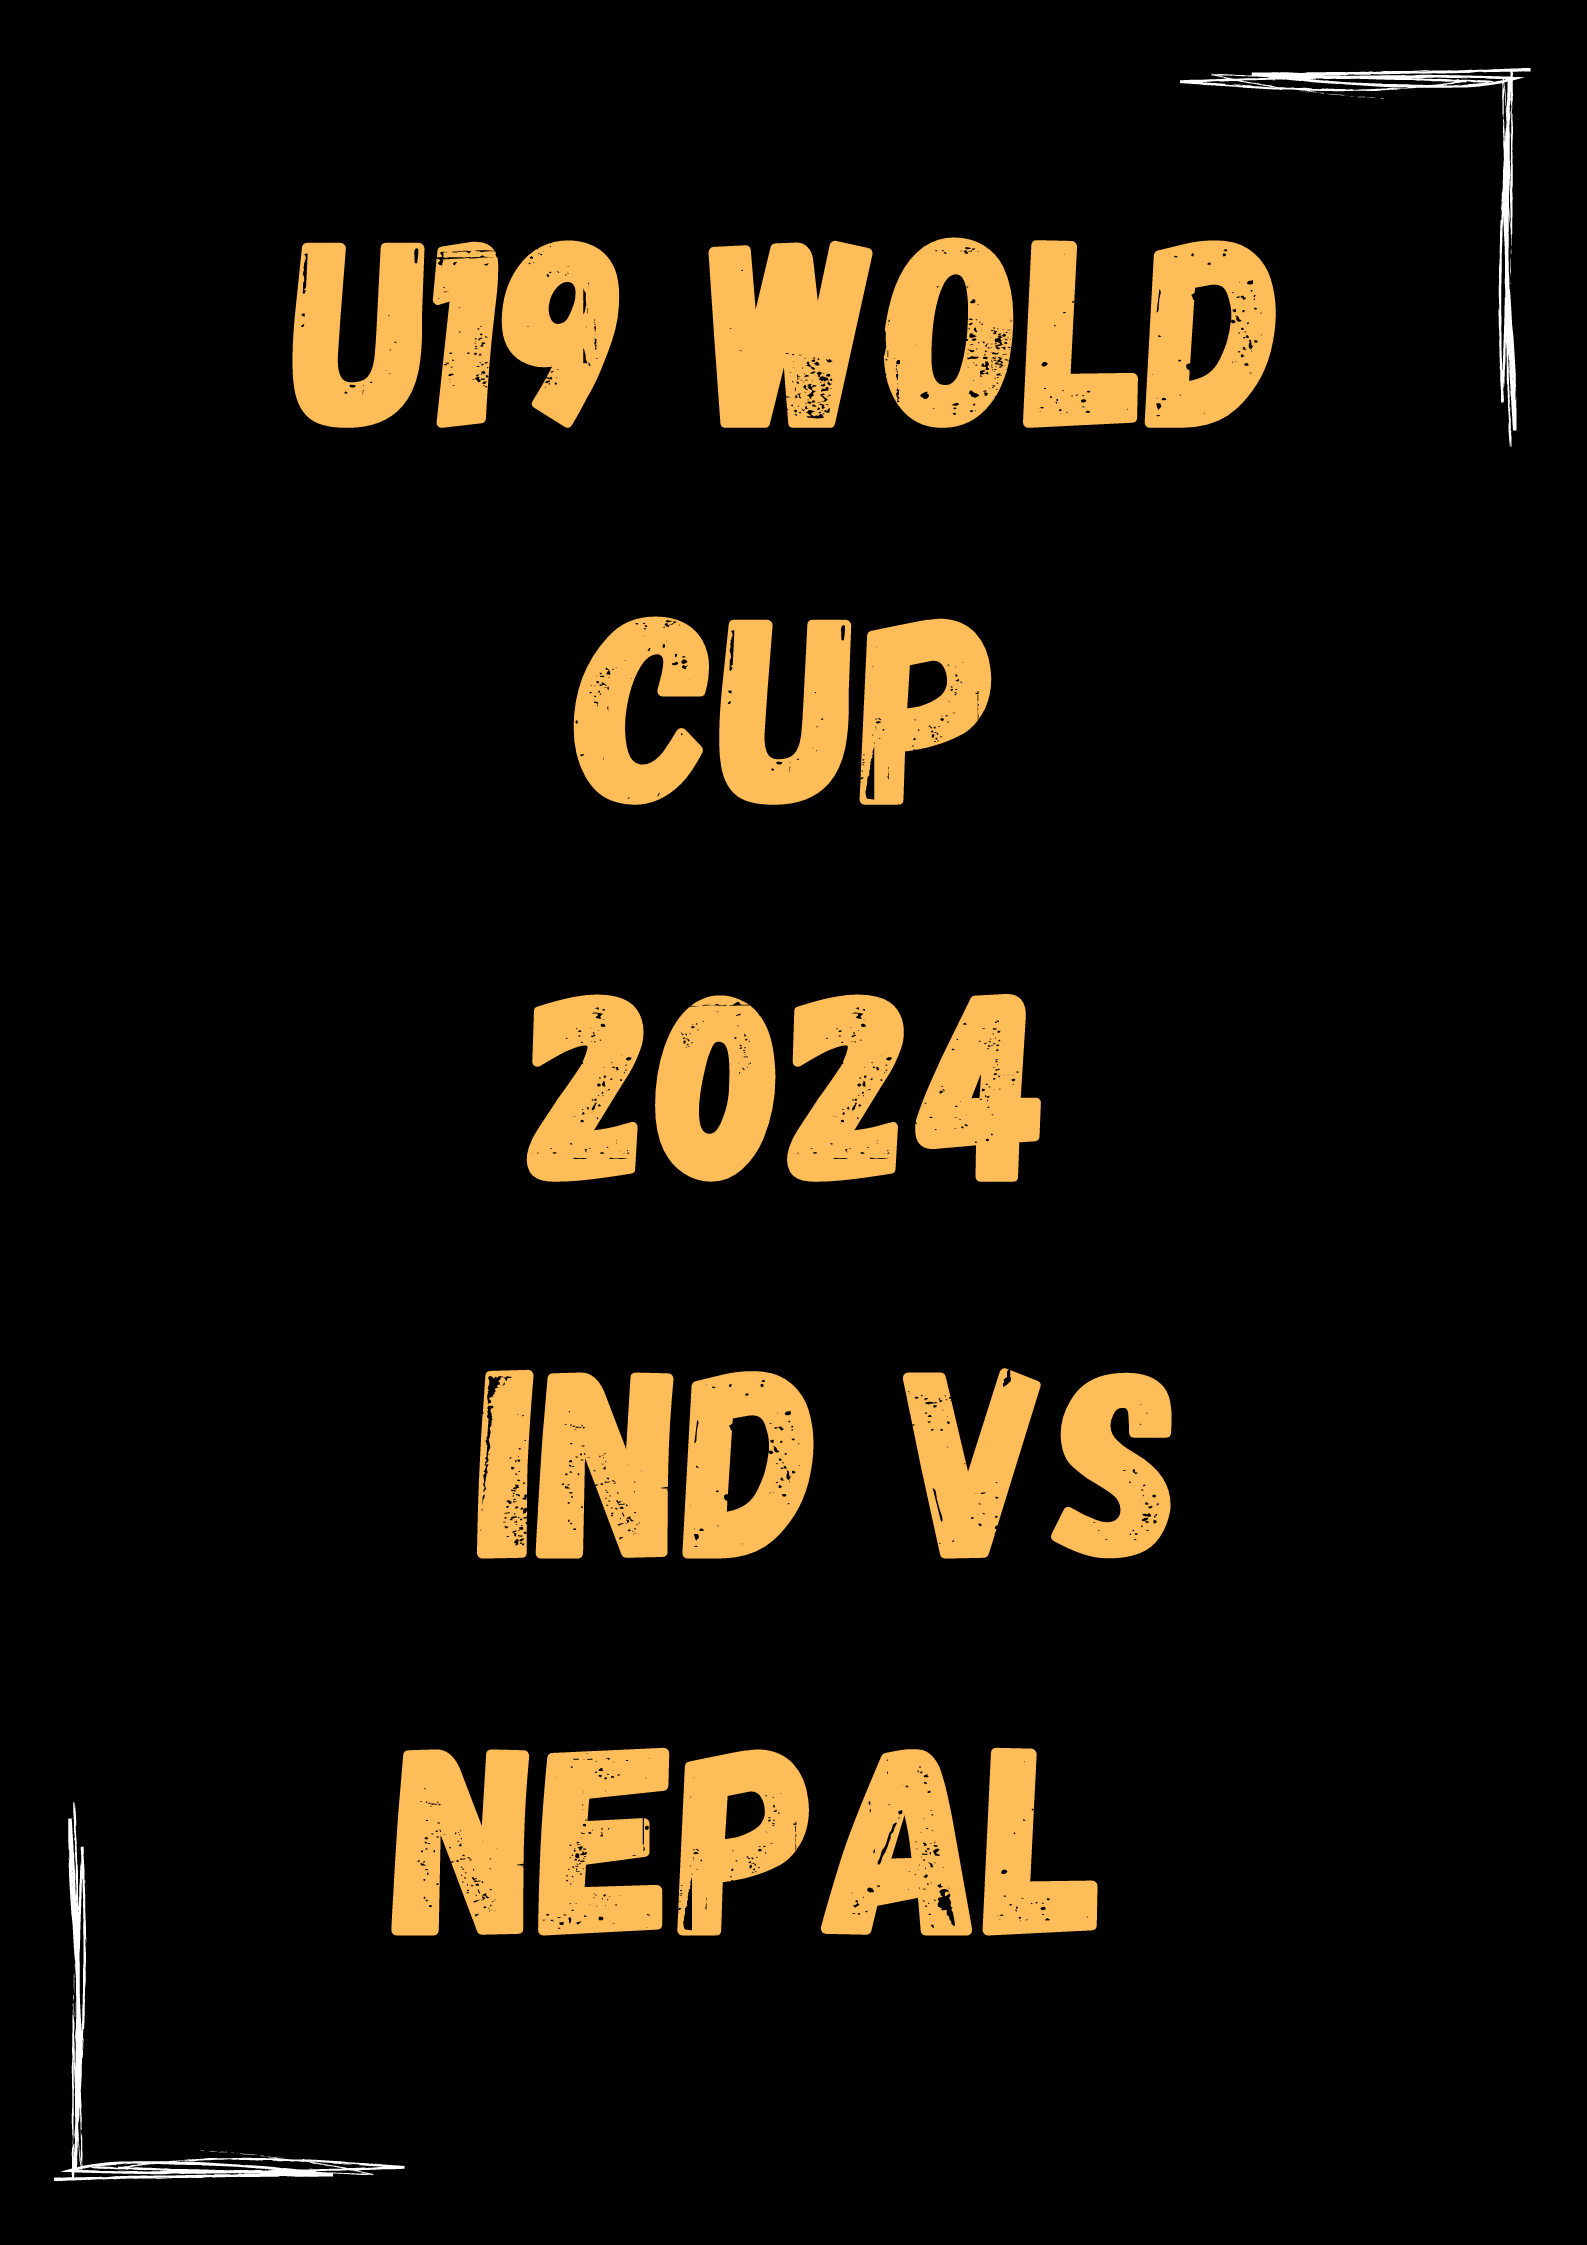 IND VS NEPAL U-19 WOLD CUP-2024